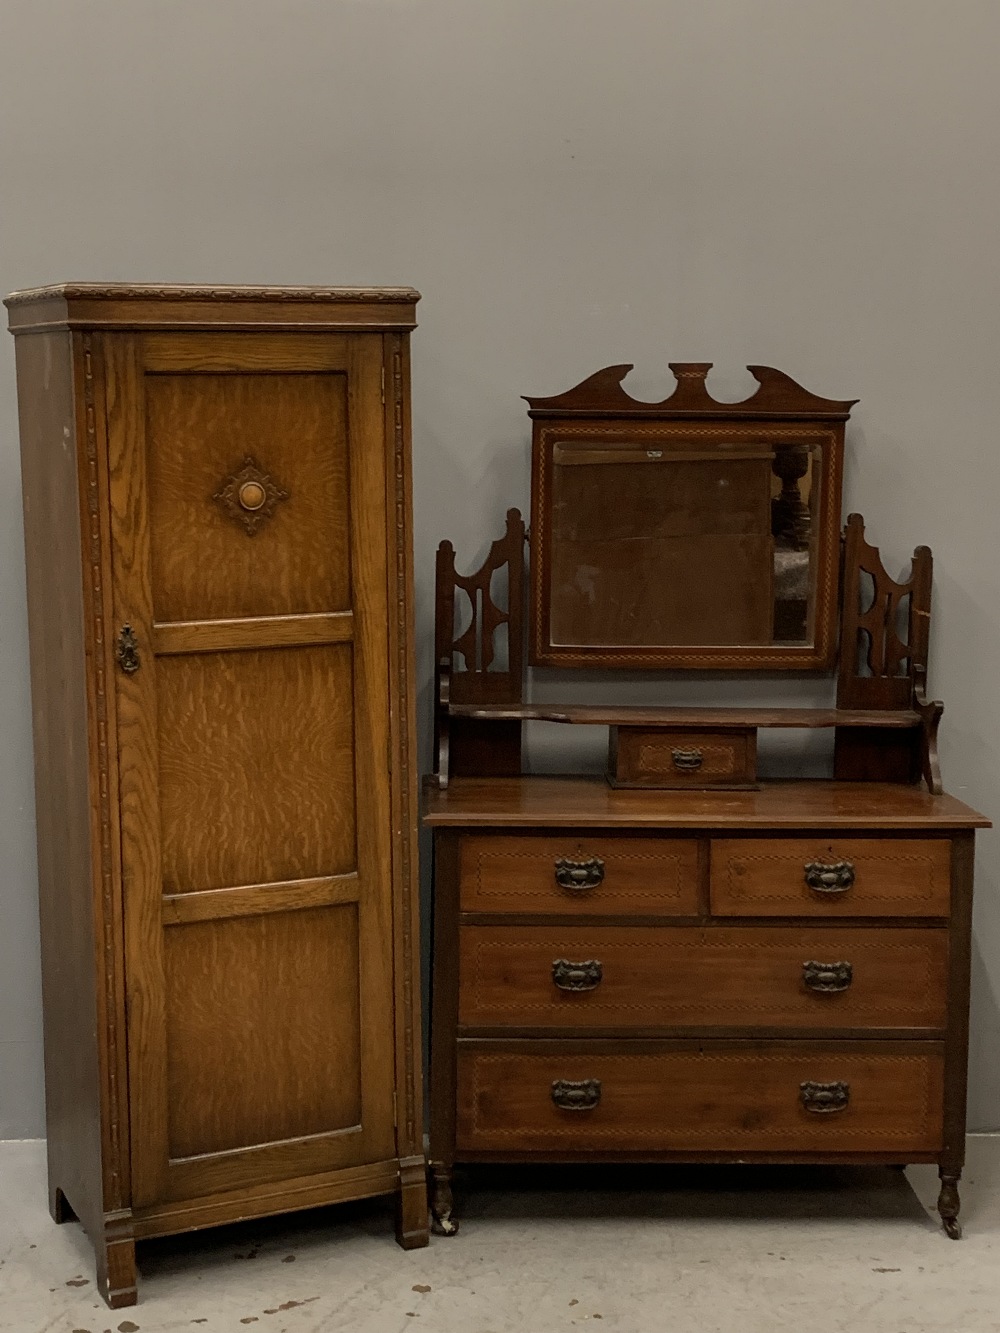 POLISHED OAK HALL ROBE with floral carving to the front, 179cms H, 61cms W, 45cms D and an antique - Image 2 of 6